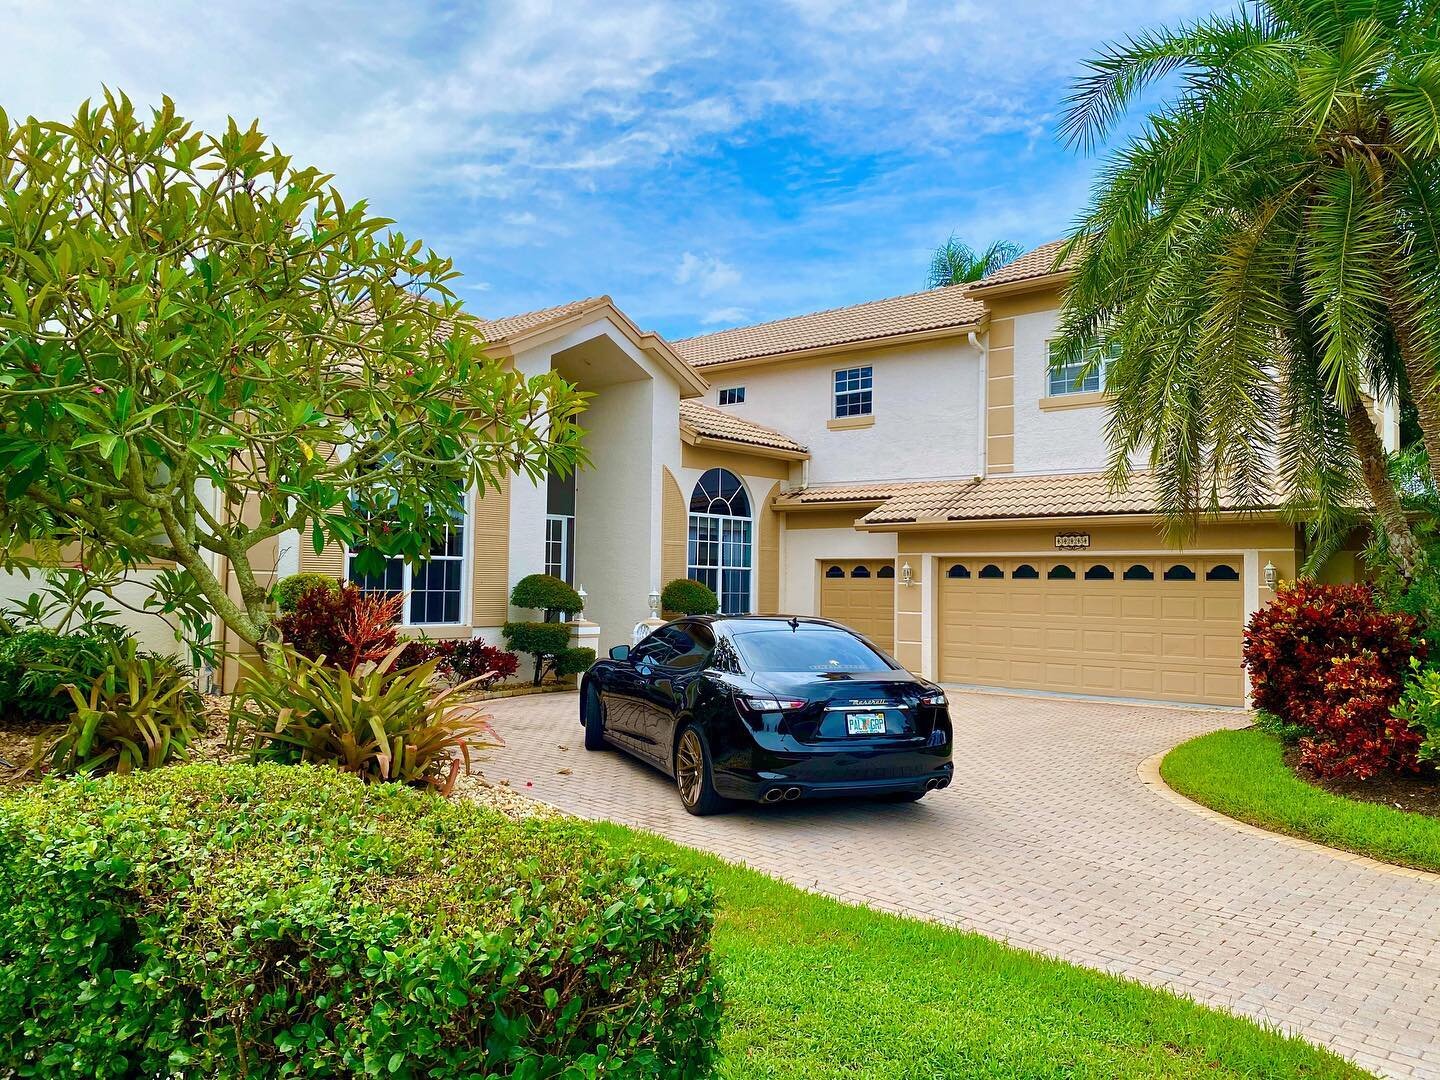 Under Contract │ Intracoastal waterfront property listed at $1,230,000 in the exclusive Ballantrae Golf and Yacht Club in Port Saint Lucie. For showings in Palm Beach or Martin County, call The Palm Group at 561-510-0022